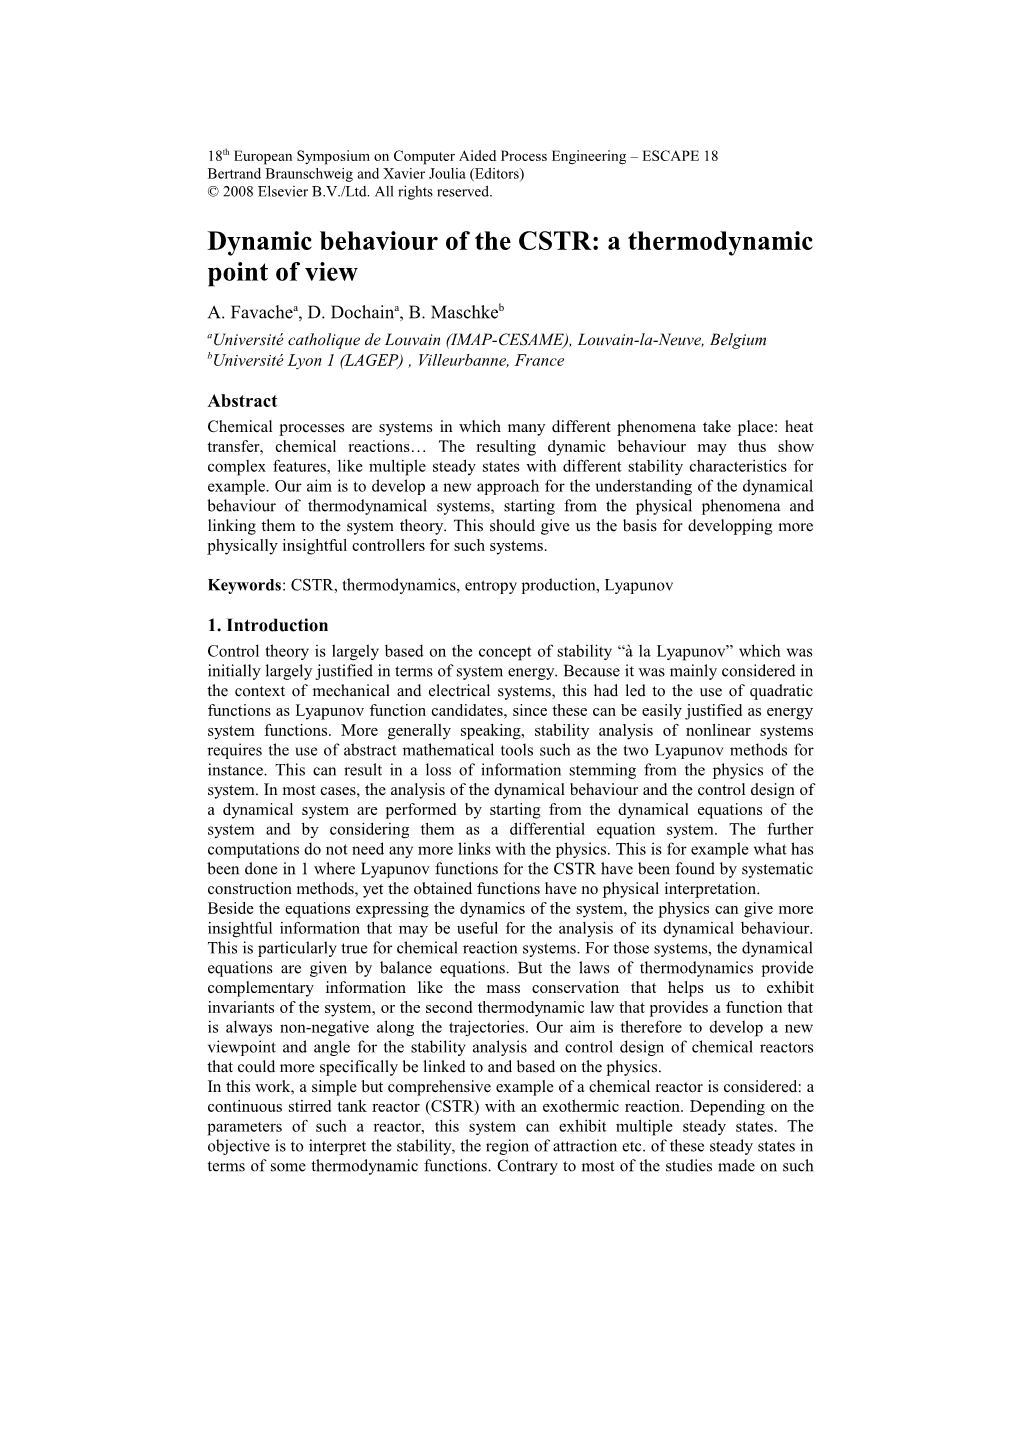 Dynamic Behaviour of the CSTR: a Thermodynamic Point of View